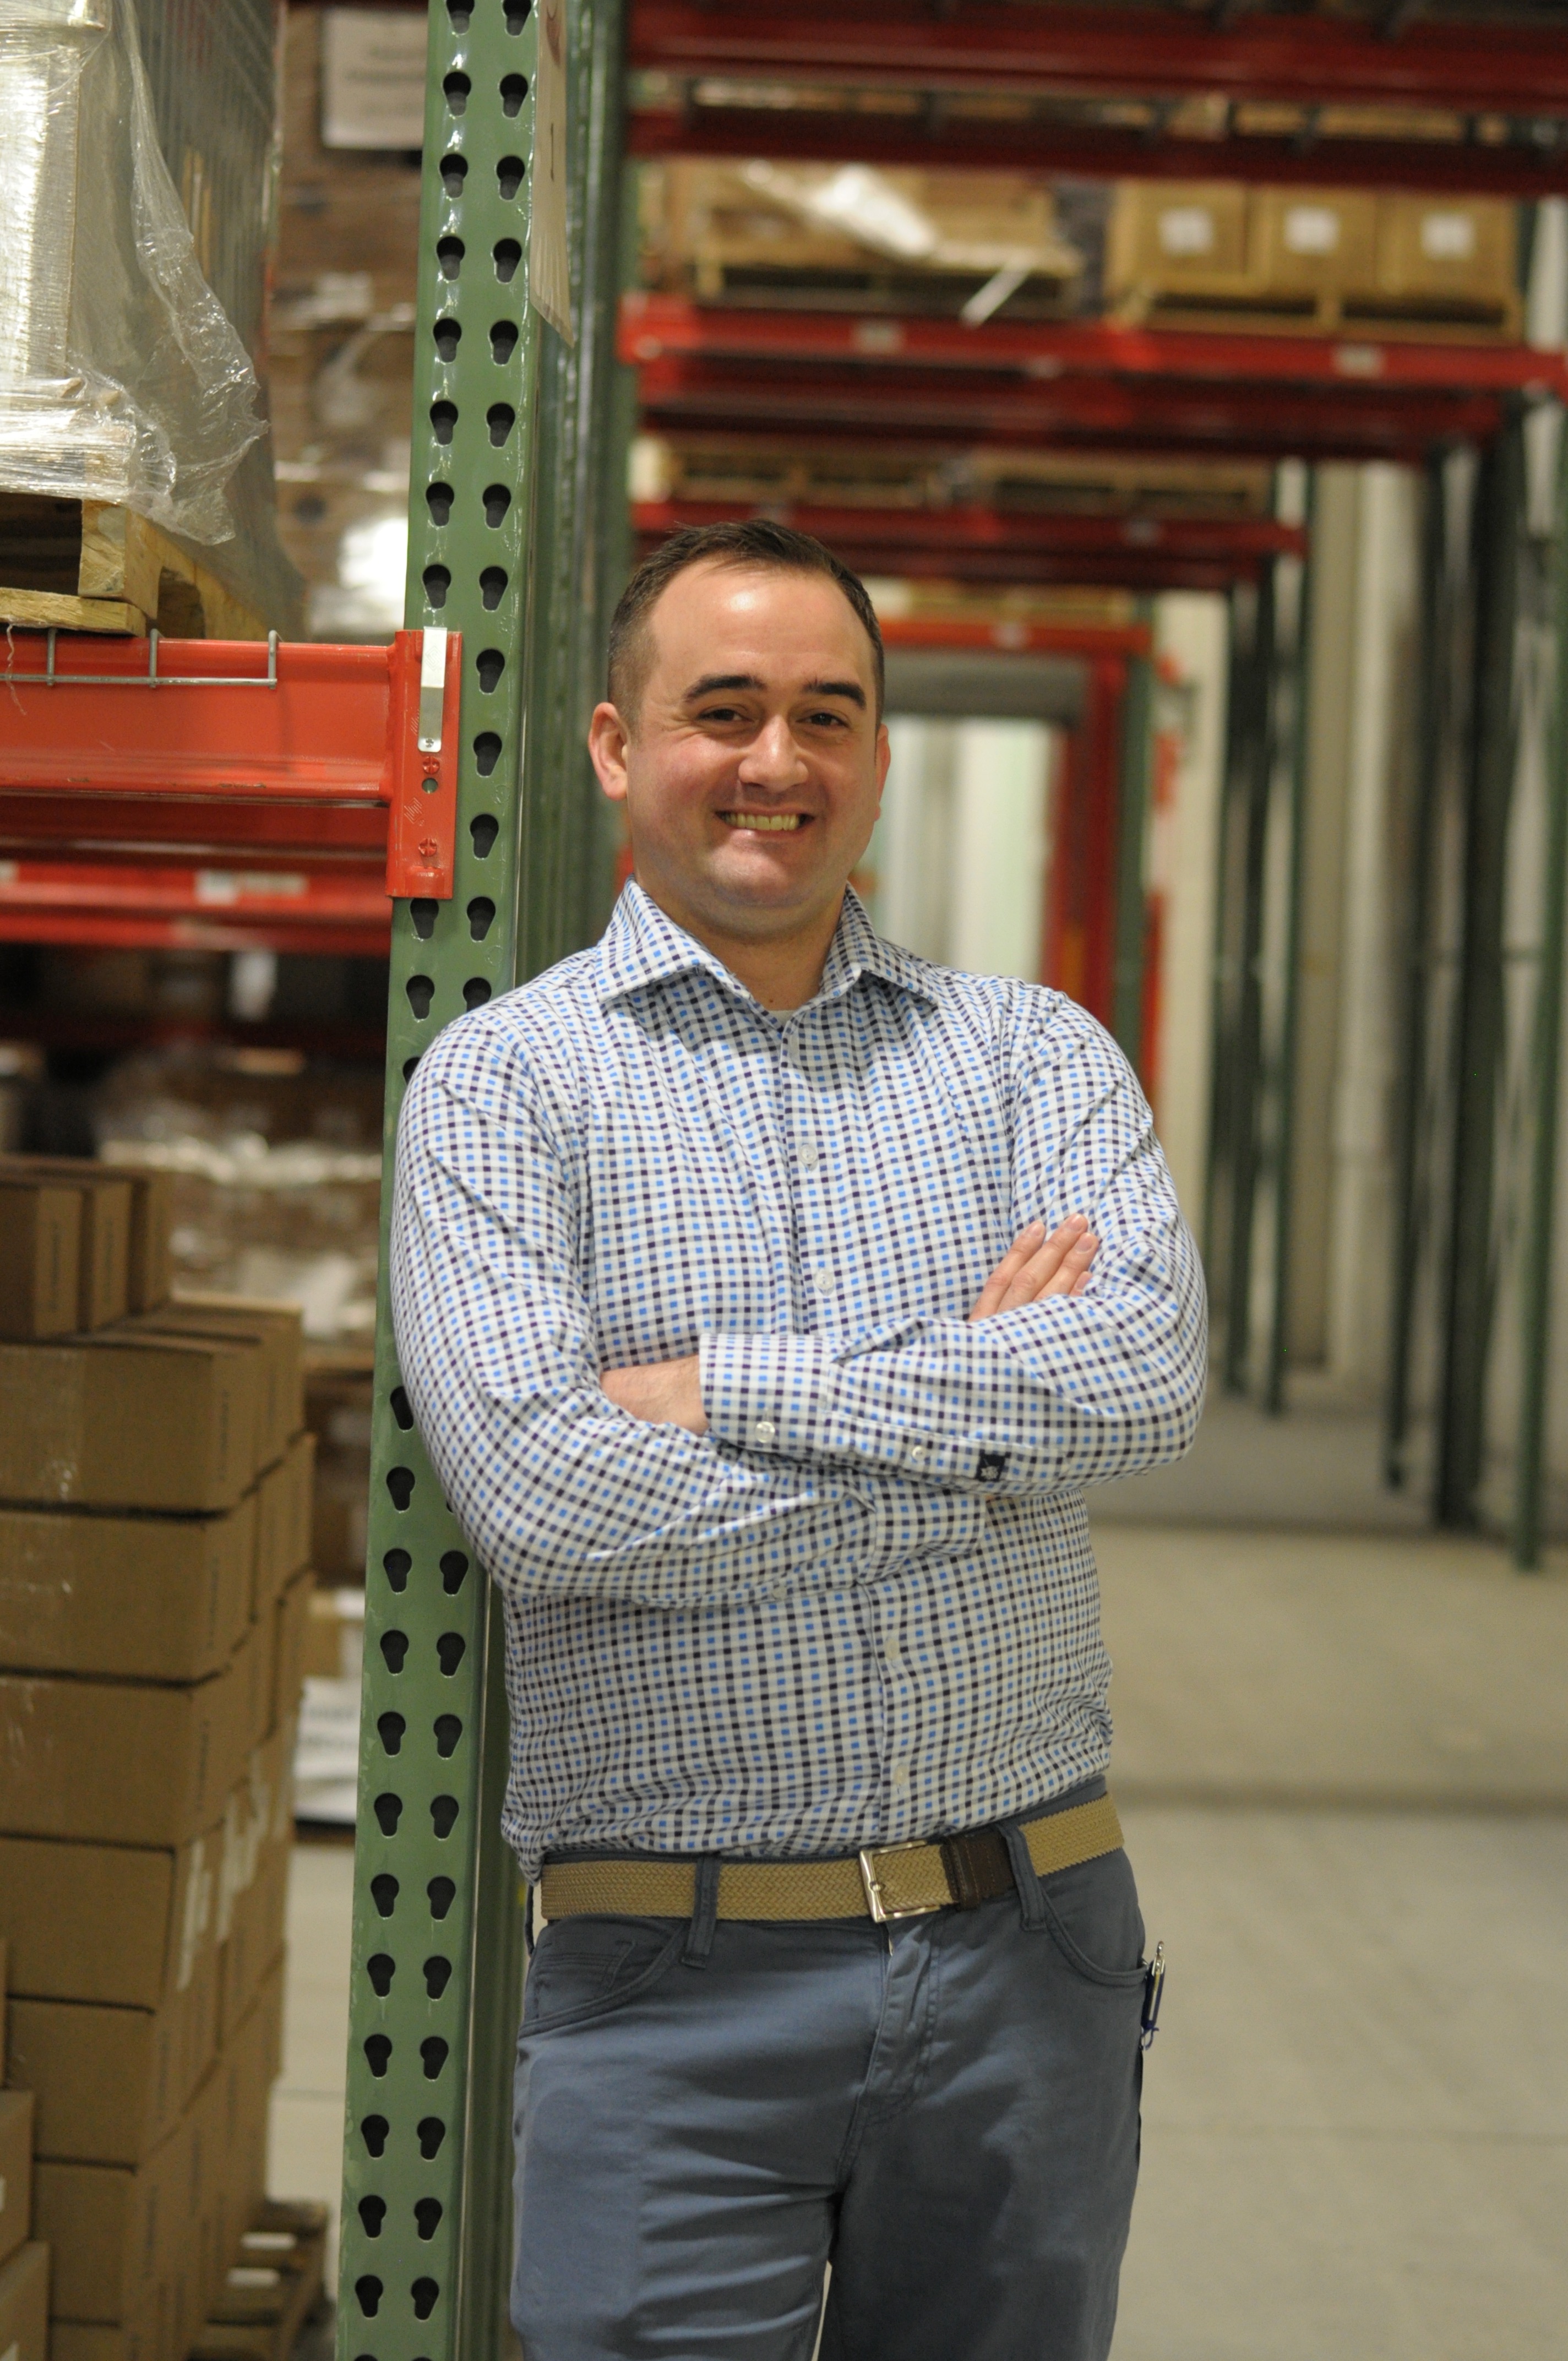 Jason Lindberg joins eFulfillment Service as director of expansion, leading the company transformation of warehousing structure, process and technology.